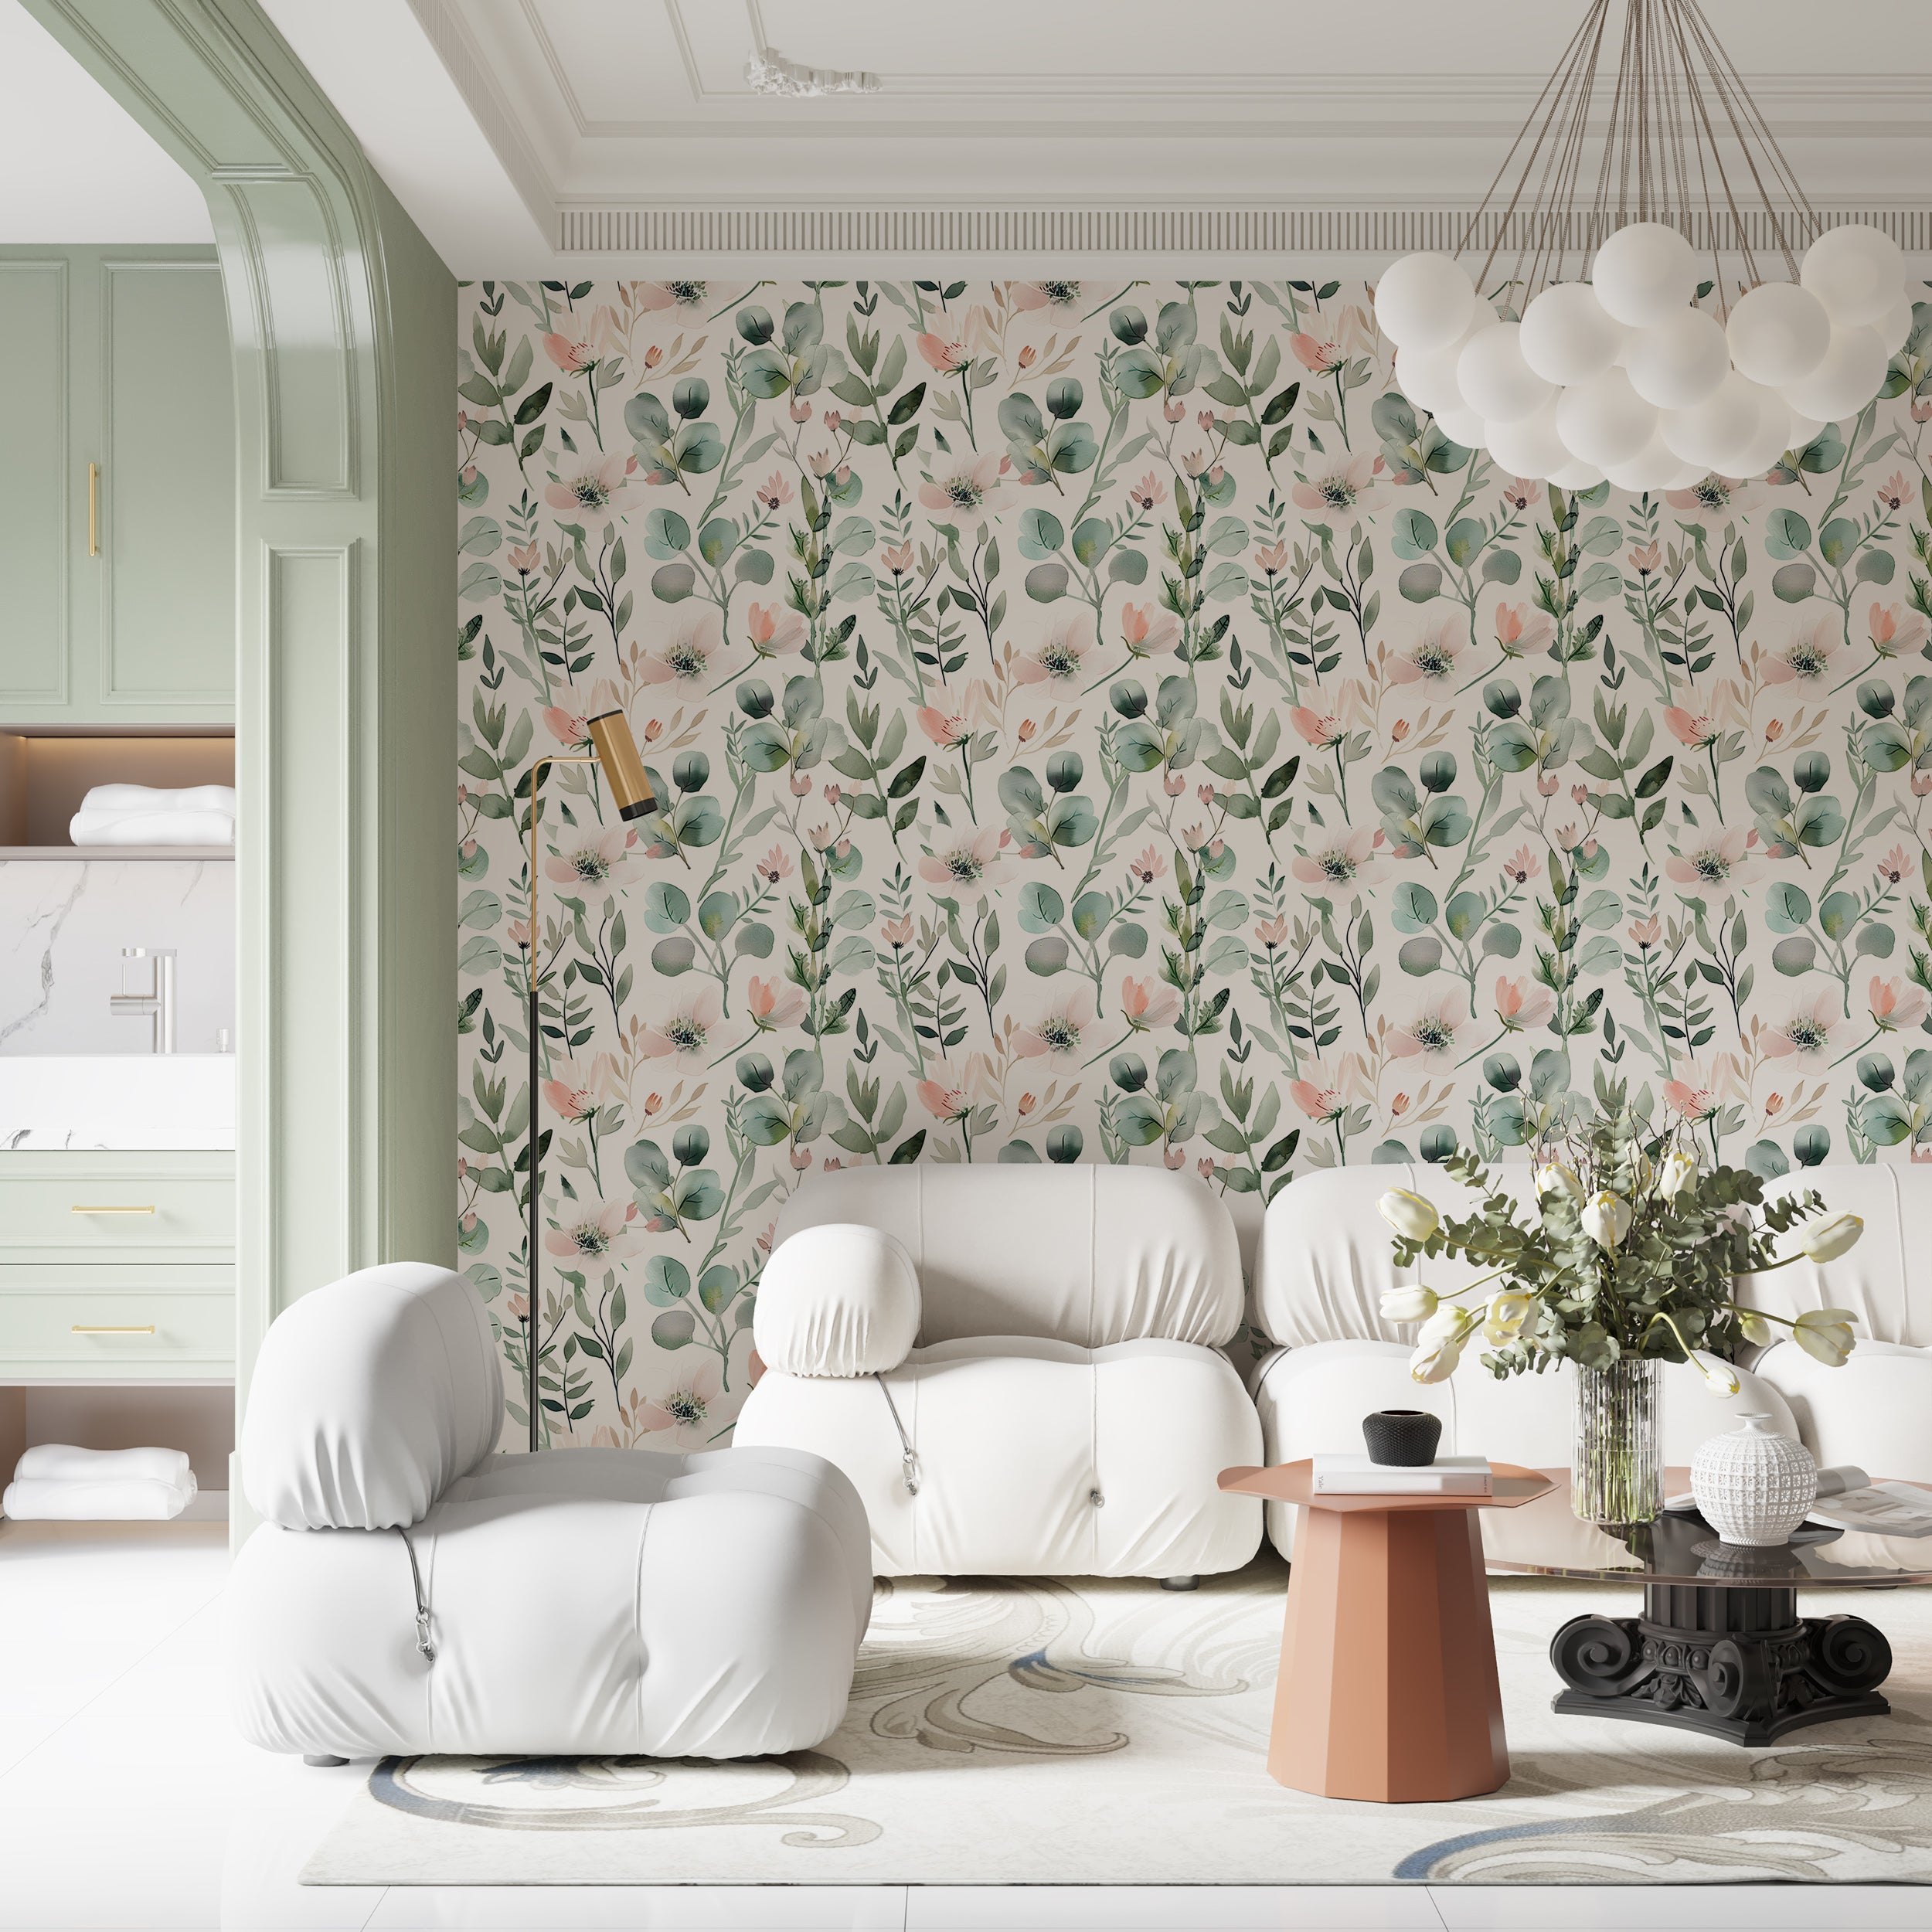 Removable botanical wallpaper with green leaves Delicate floral pattern in pastel colors